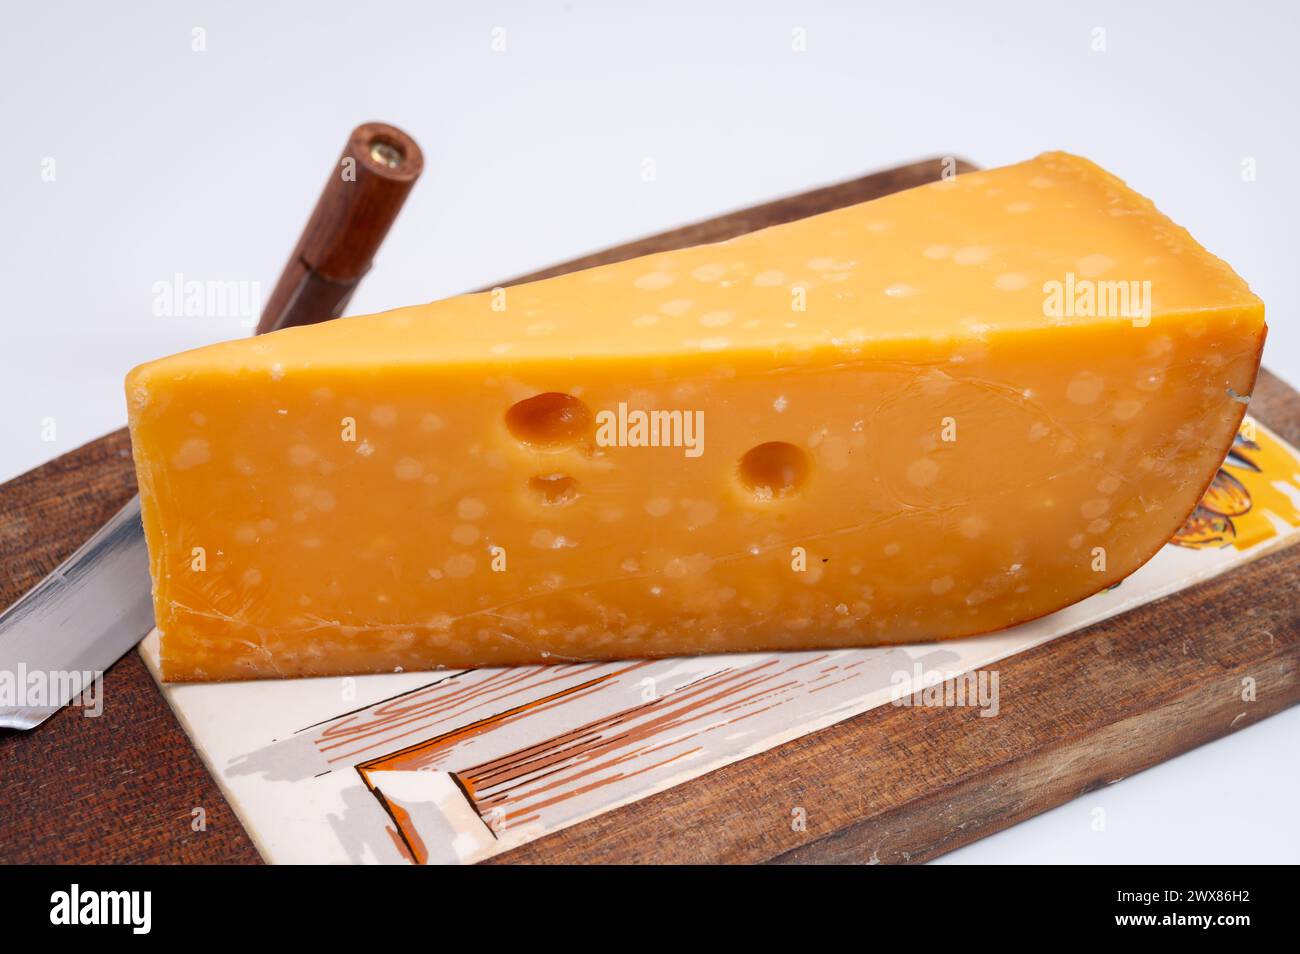 Cheese collection, Dutch very old 1000 days ripe hard cheeses made from cow milk in the Netherlands close up Stock Photo